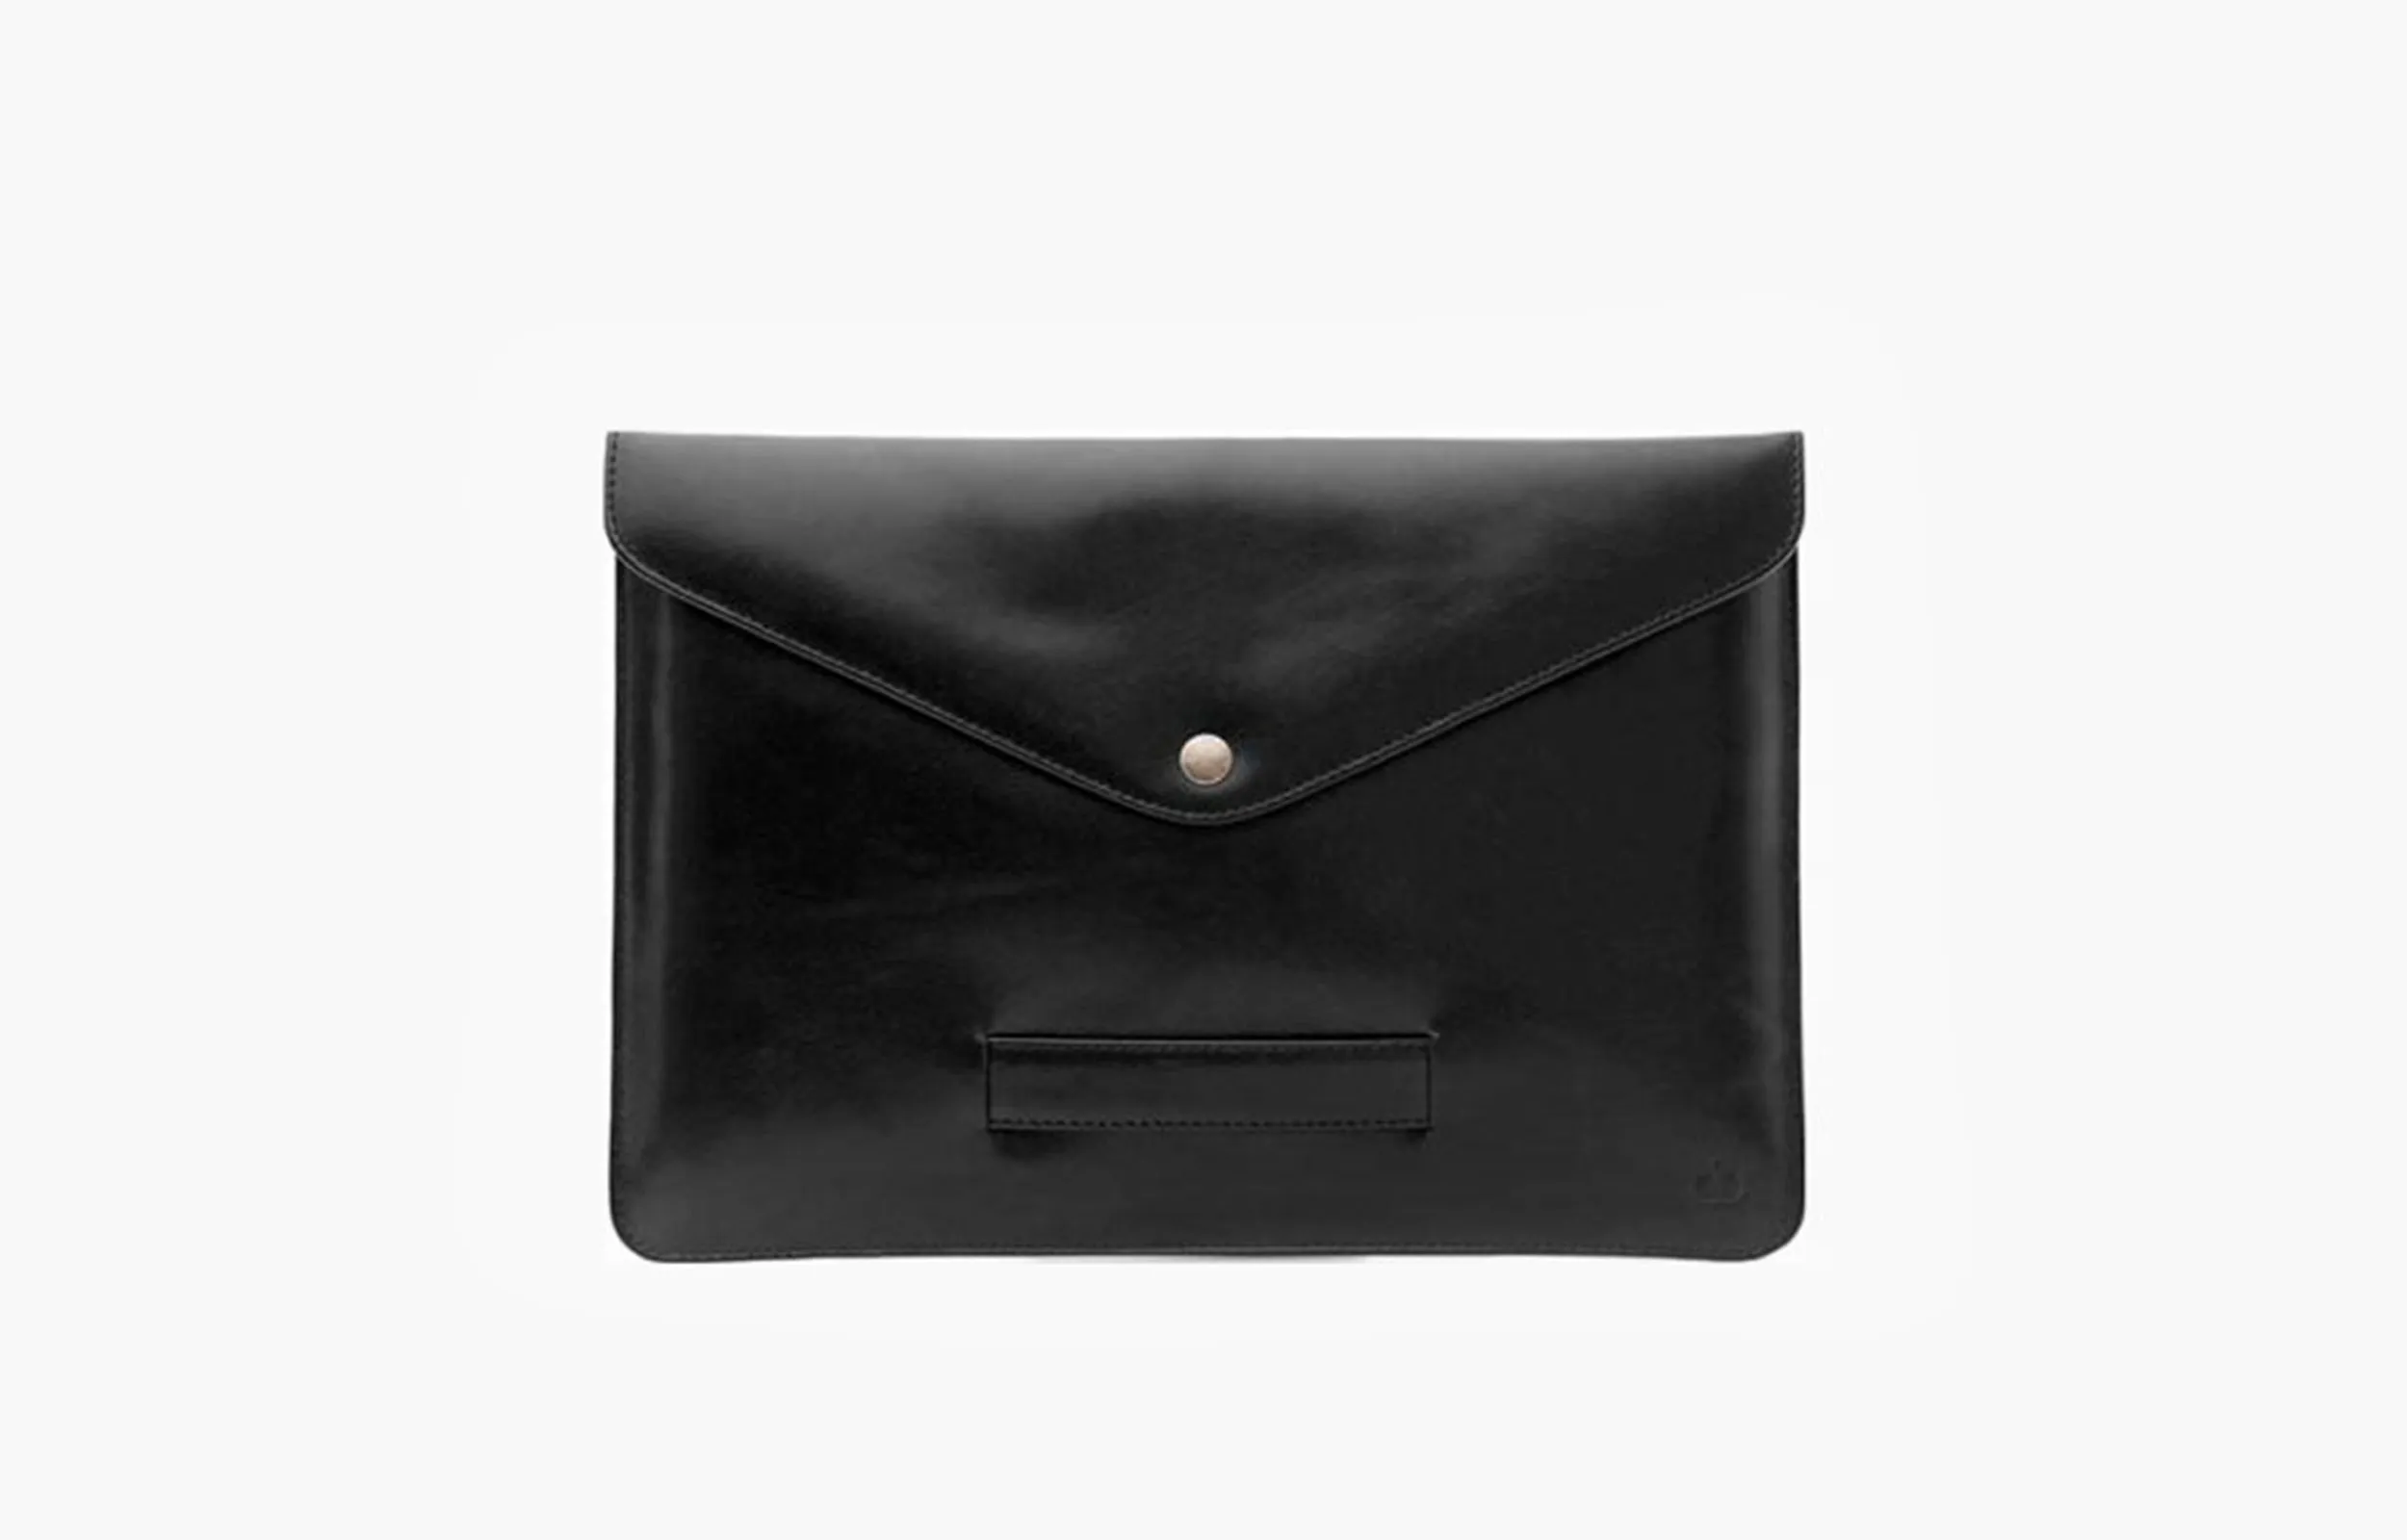 Cooper Midnight Black Leather Bags UK 5